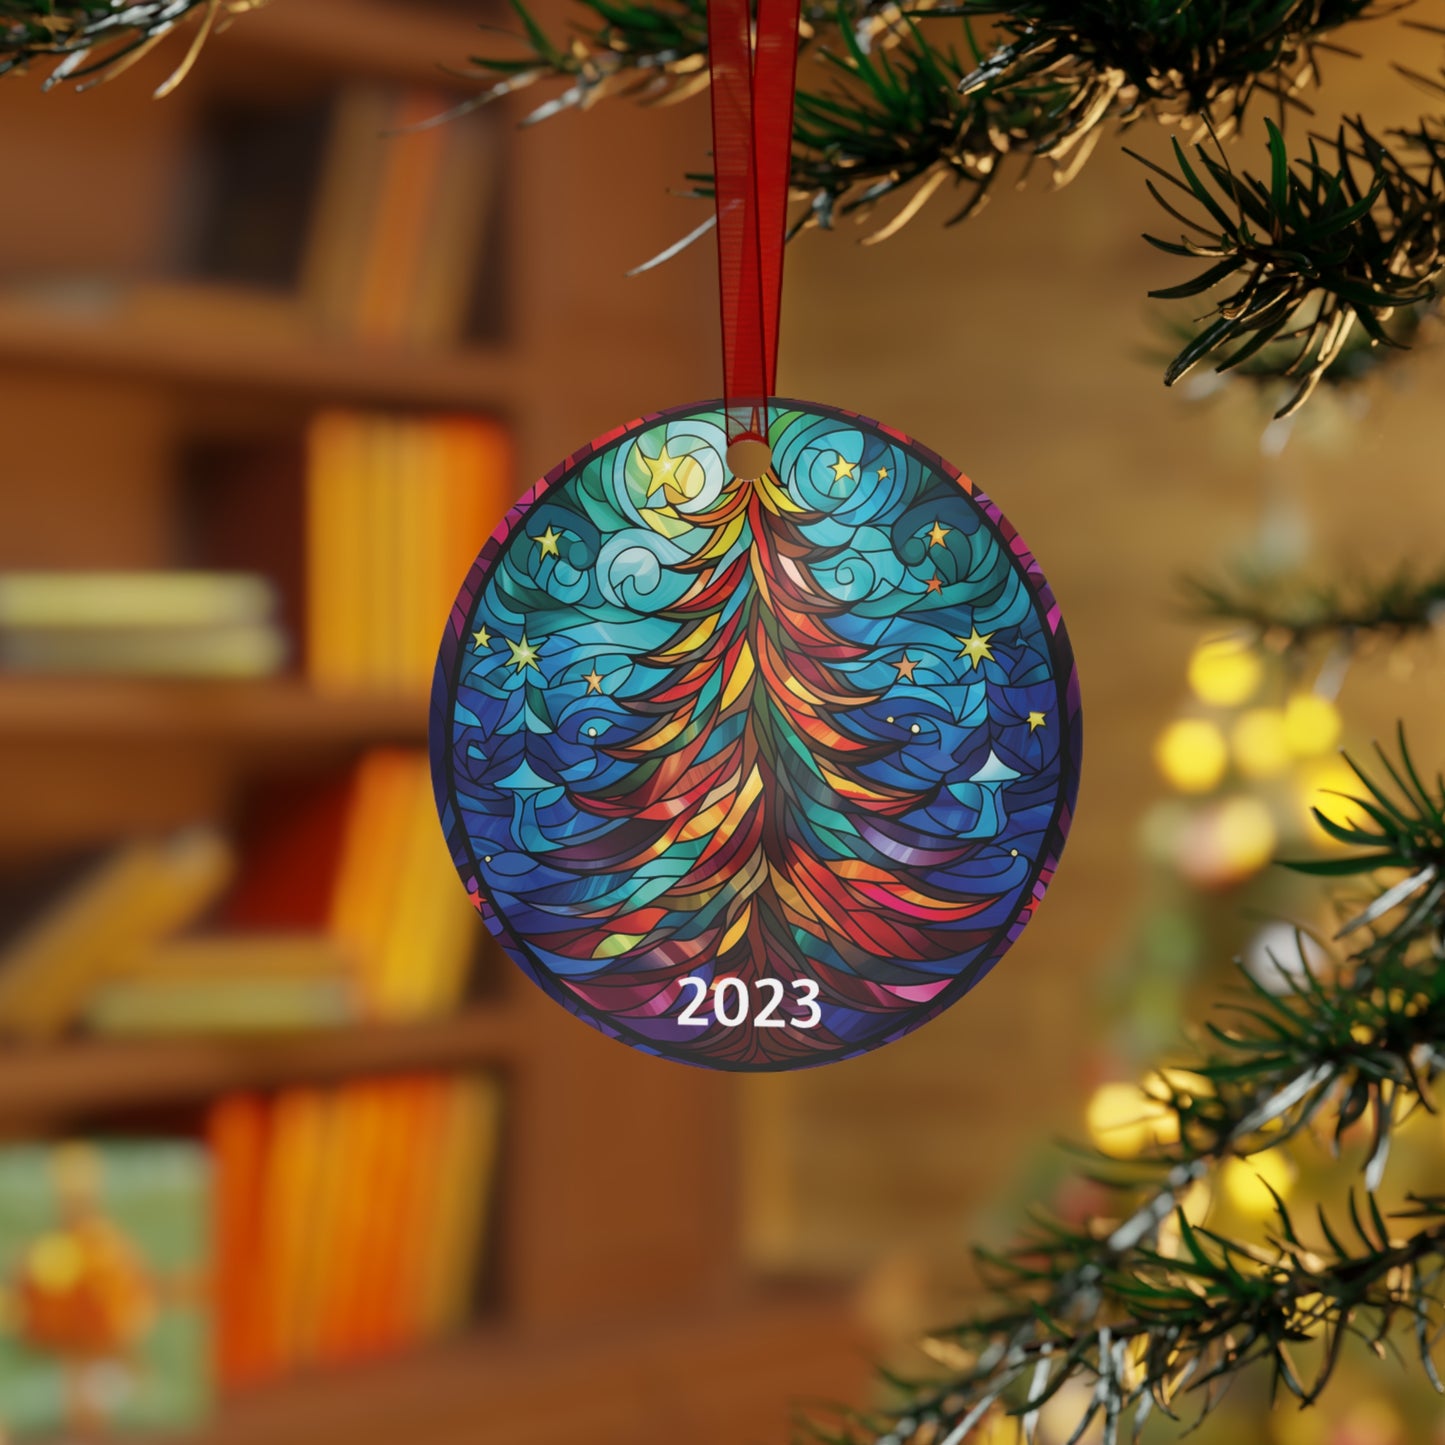 Christmas Tree Stained Glass Style Ornament Lightweight Shaterproof Metal Ornaments Christmas Ornament Exchange Christmas Tree 2023 Ornament